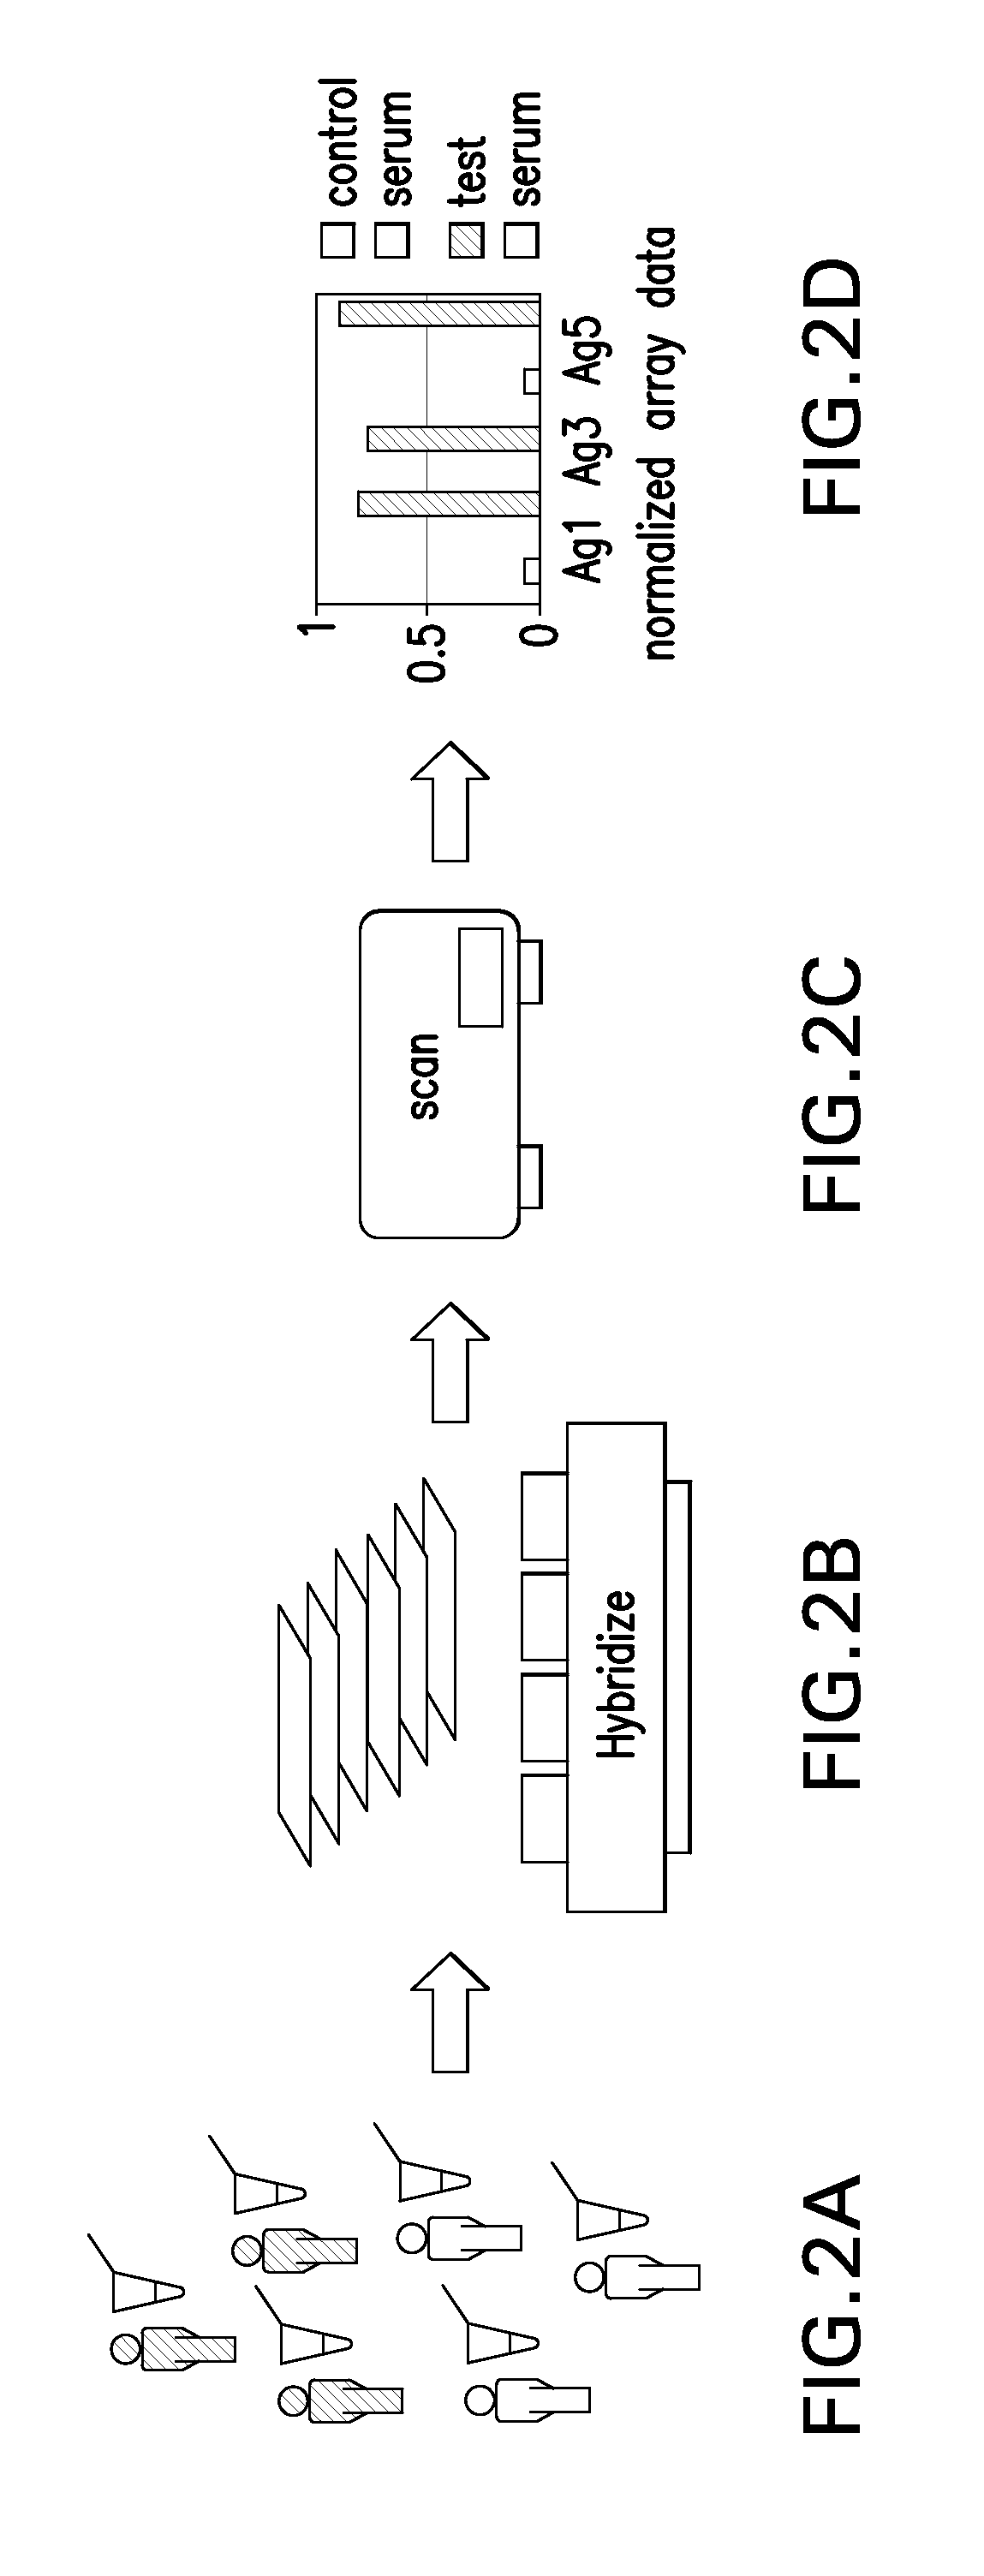 Autoantibody detection systems and methods